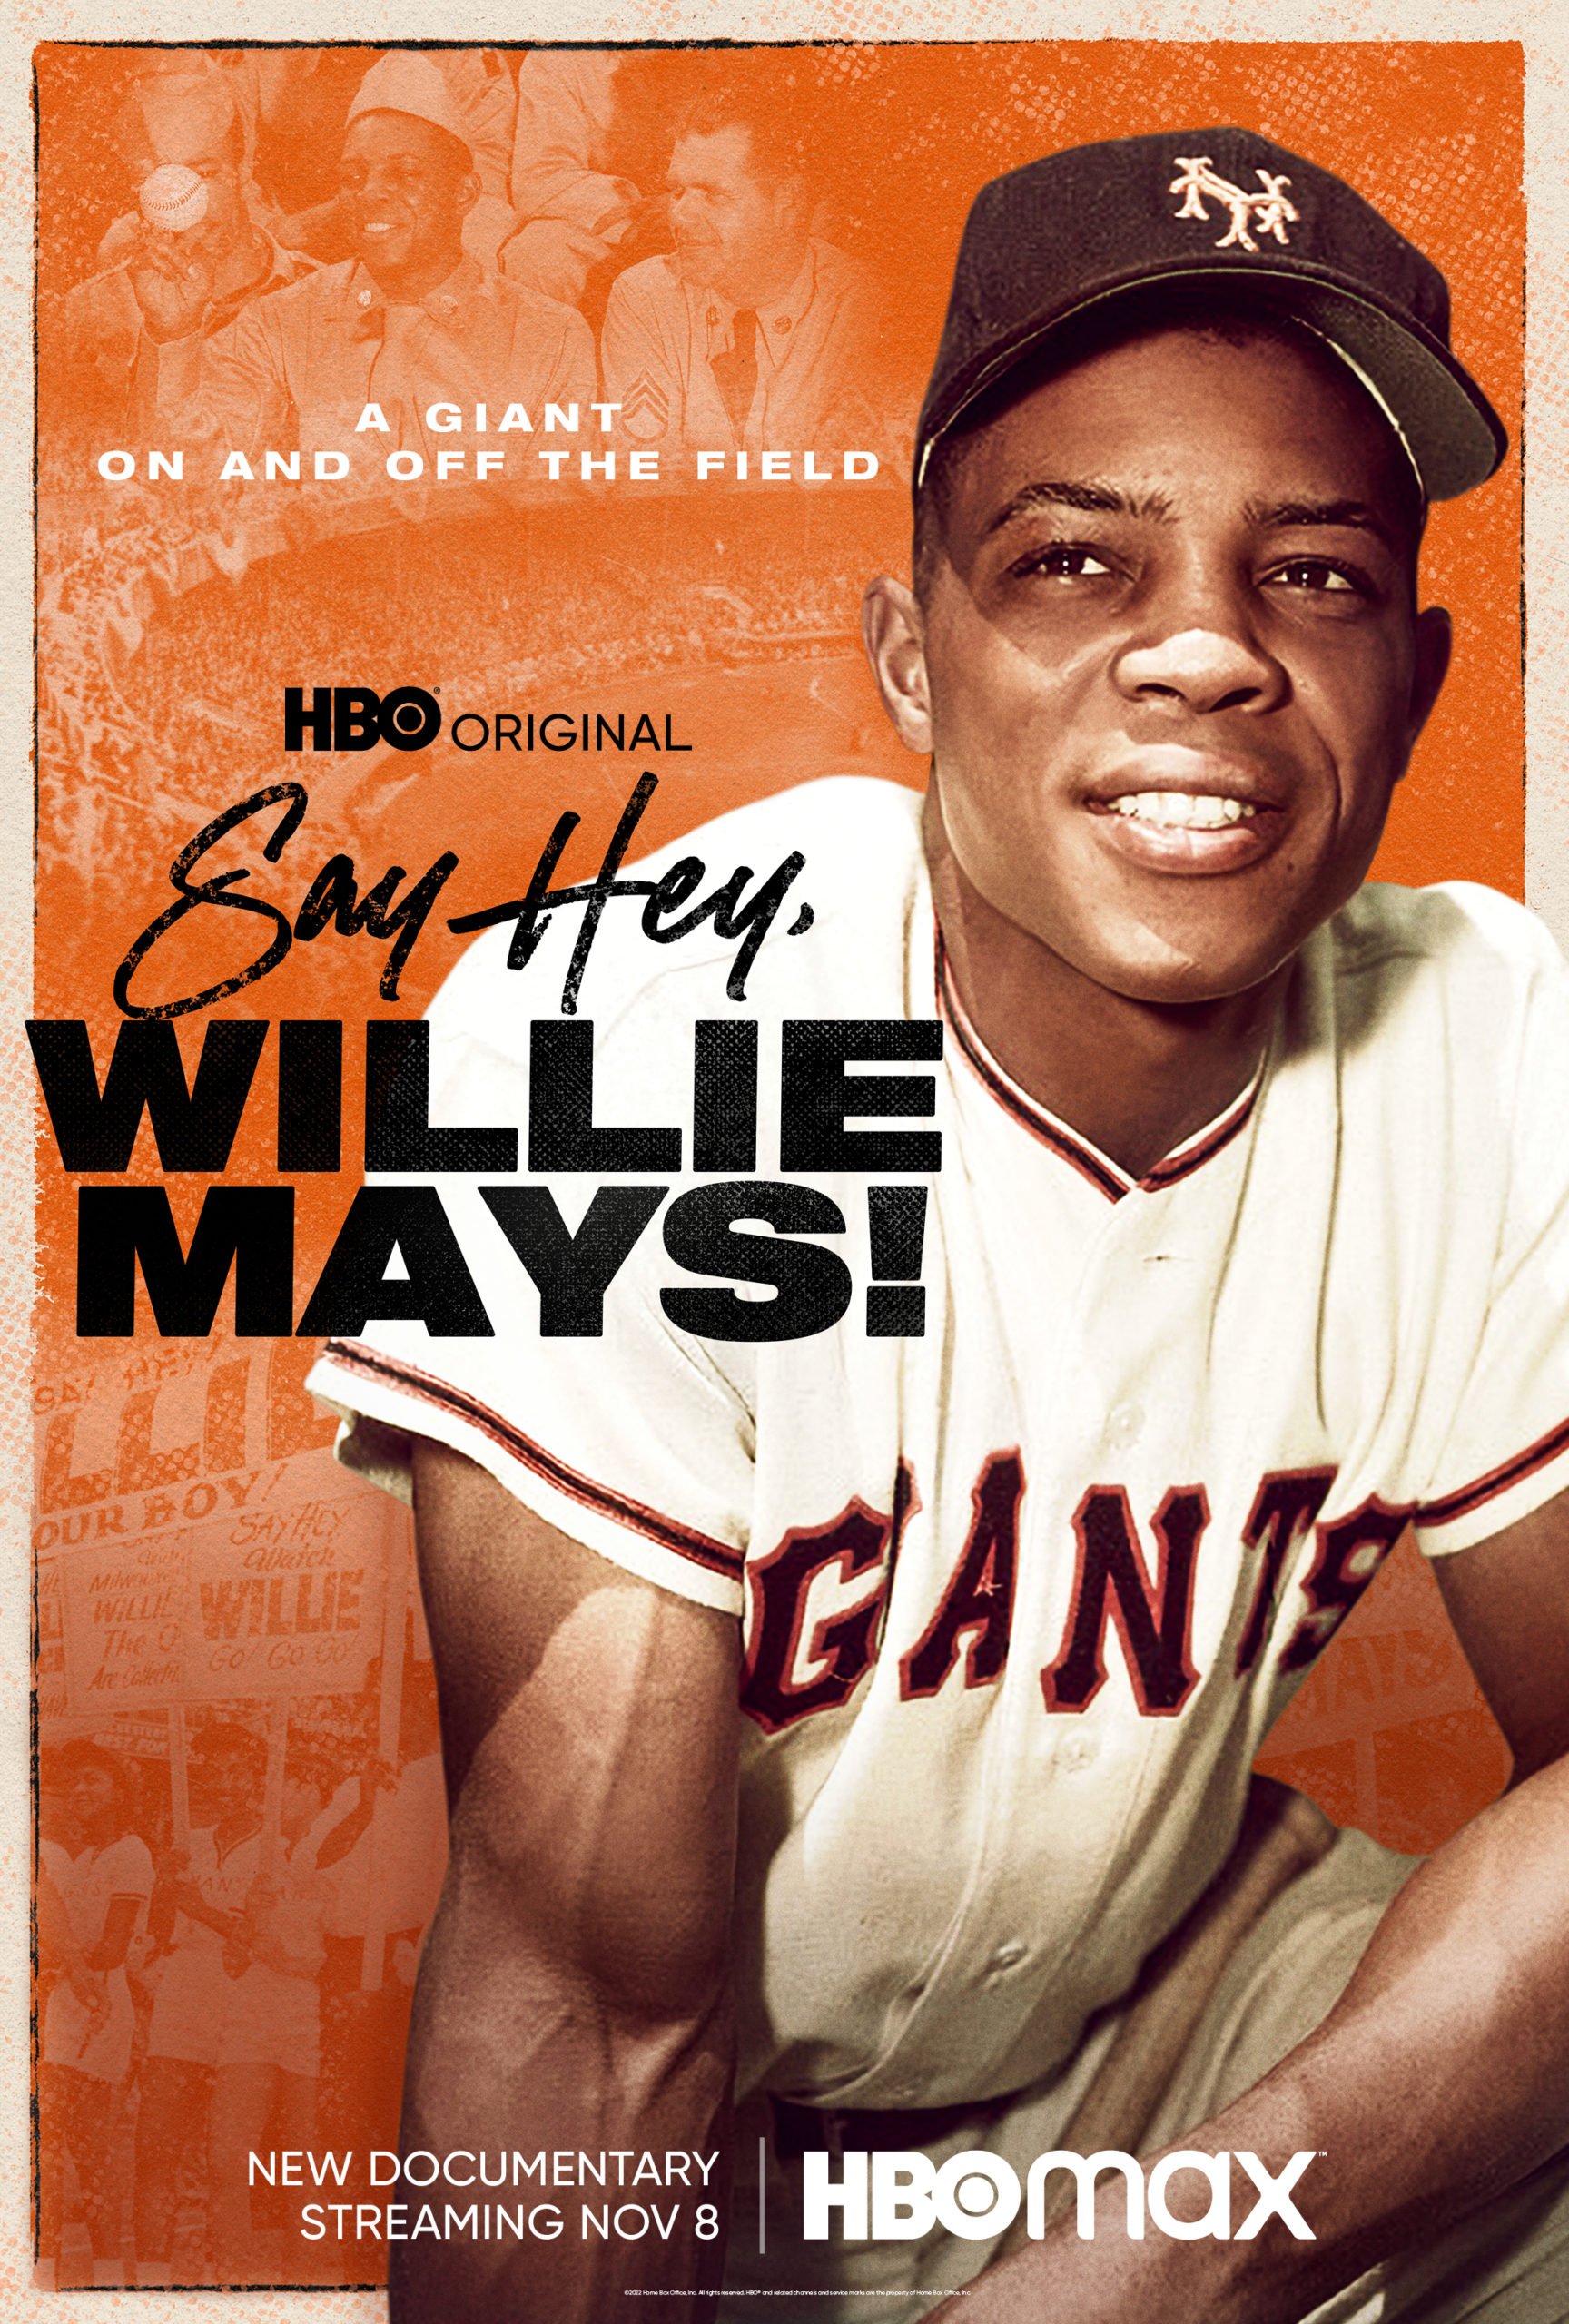 Say Hey, Willie Mays! Movie 2022, Official Trailer, Release Date